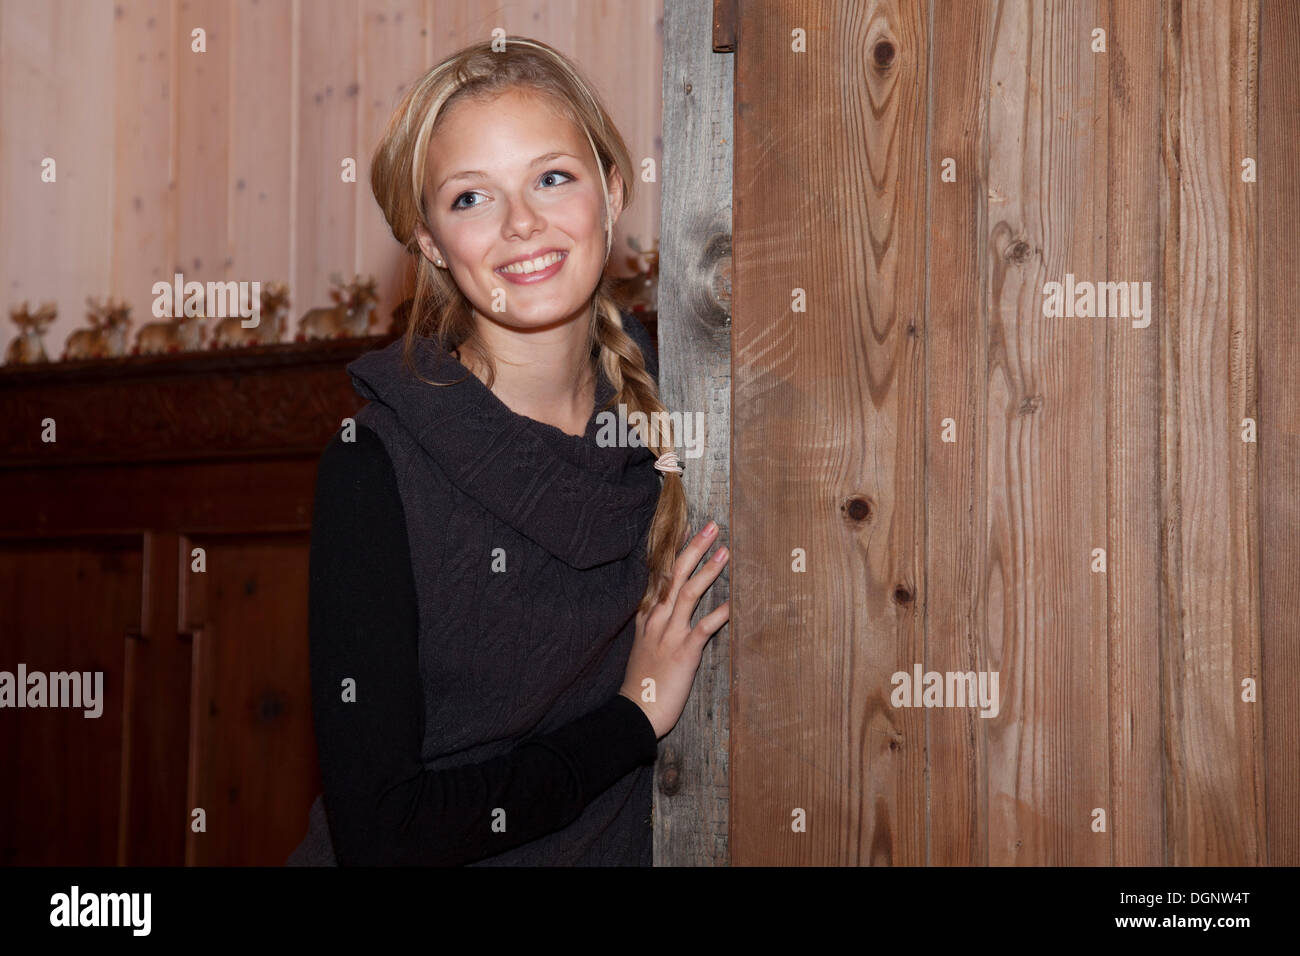 Smiling young woman leaning against a old door Stock Photo